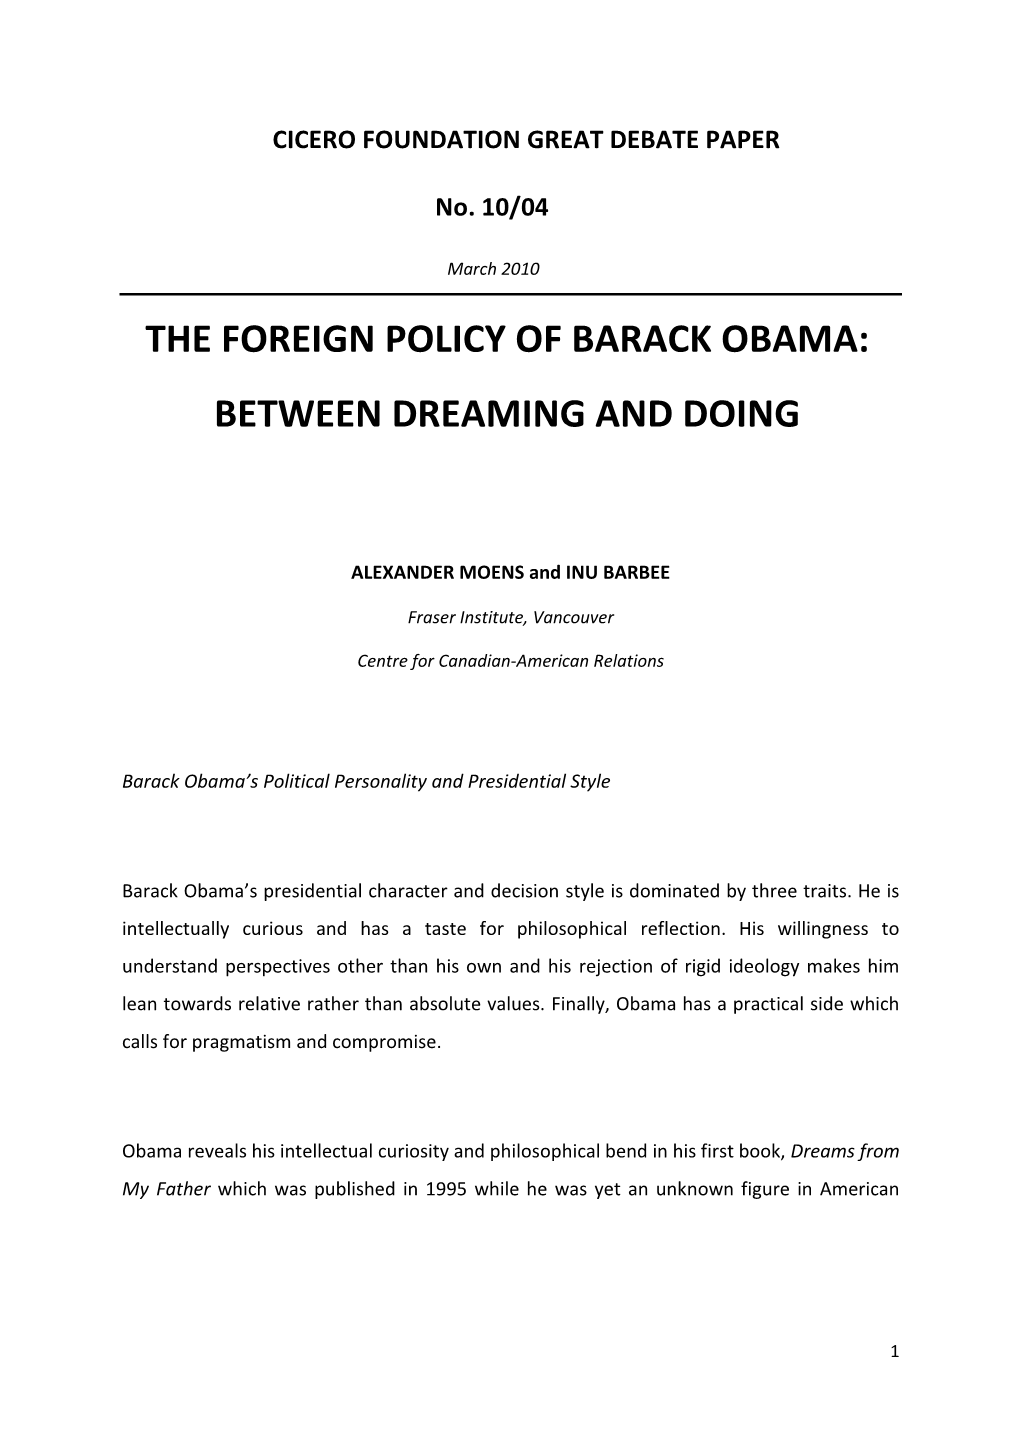 The Foreign Policy of Barack Obama: Between Dreaming and Doing